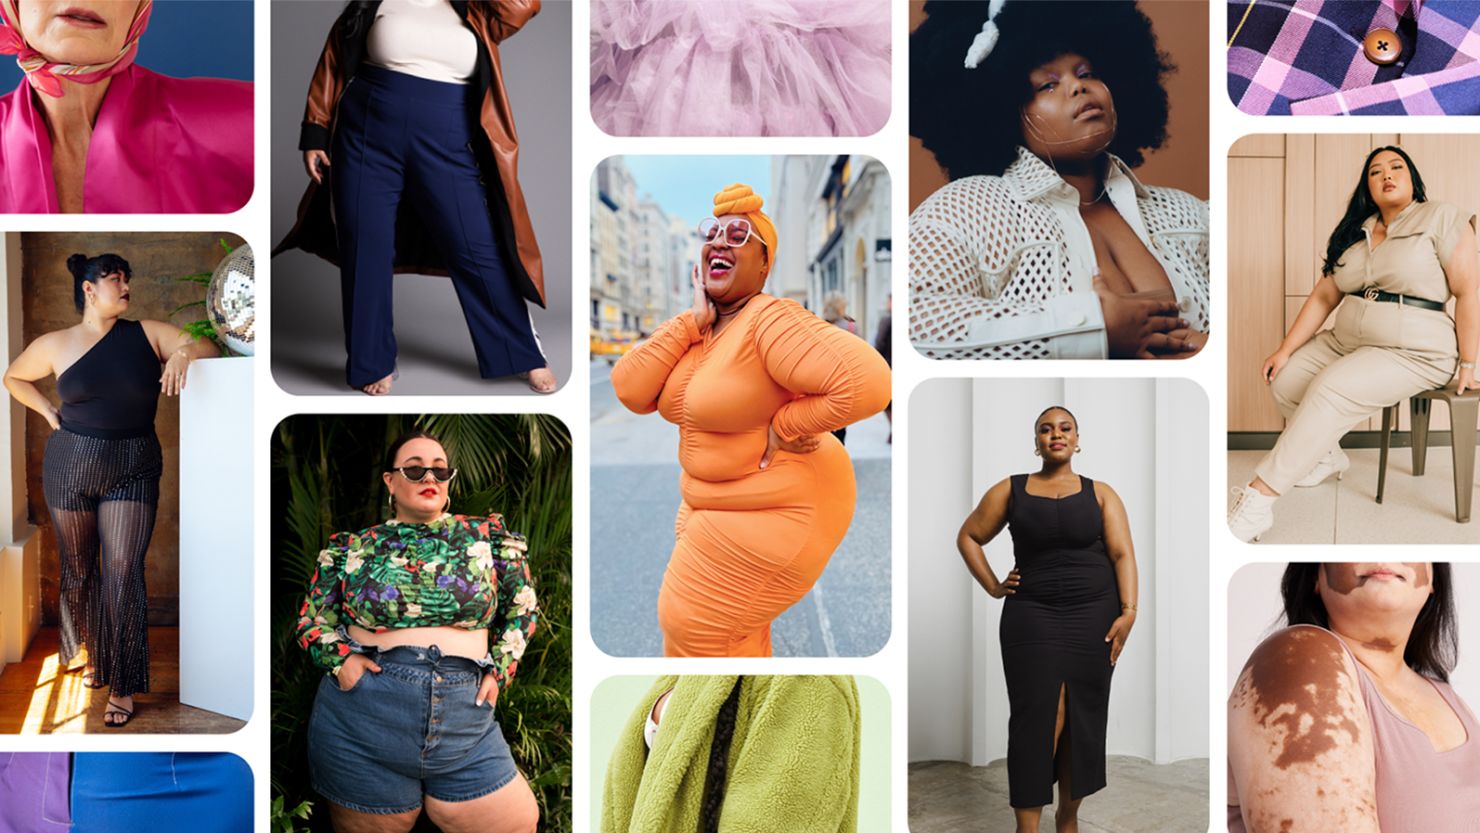 Pinterest is embracing body inclusivity in its search results | CNN ...